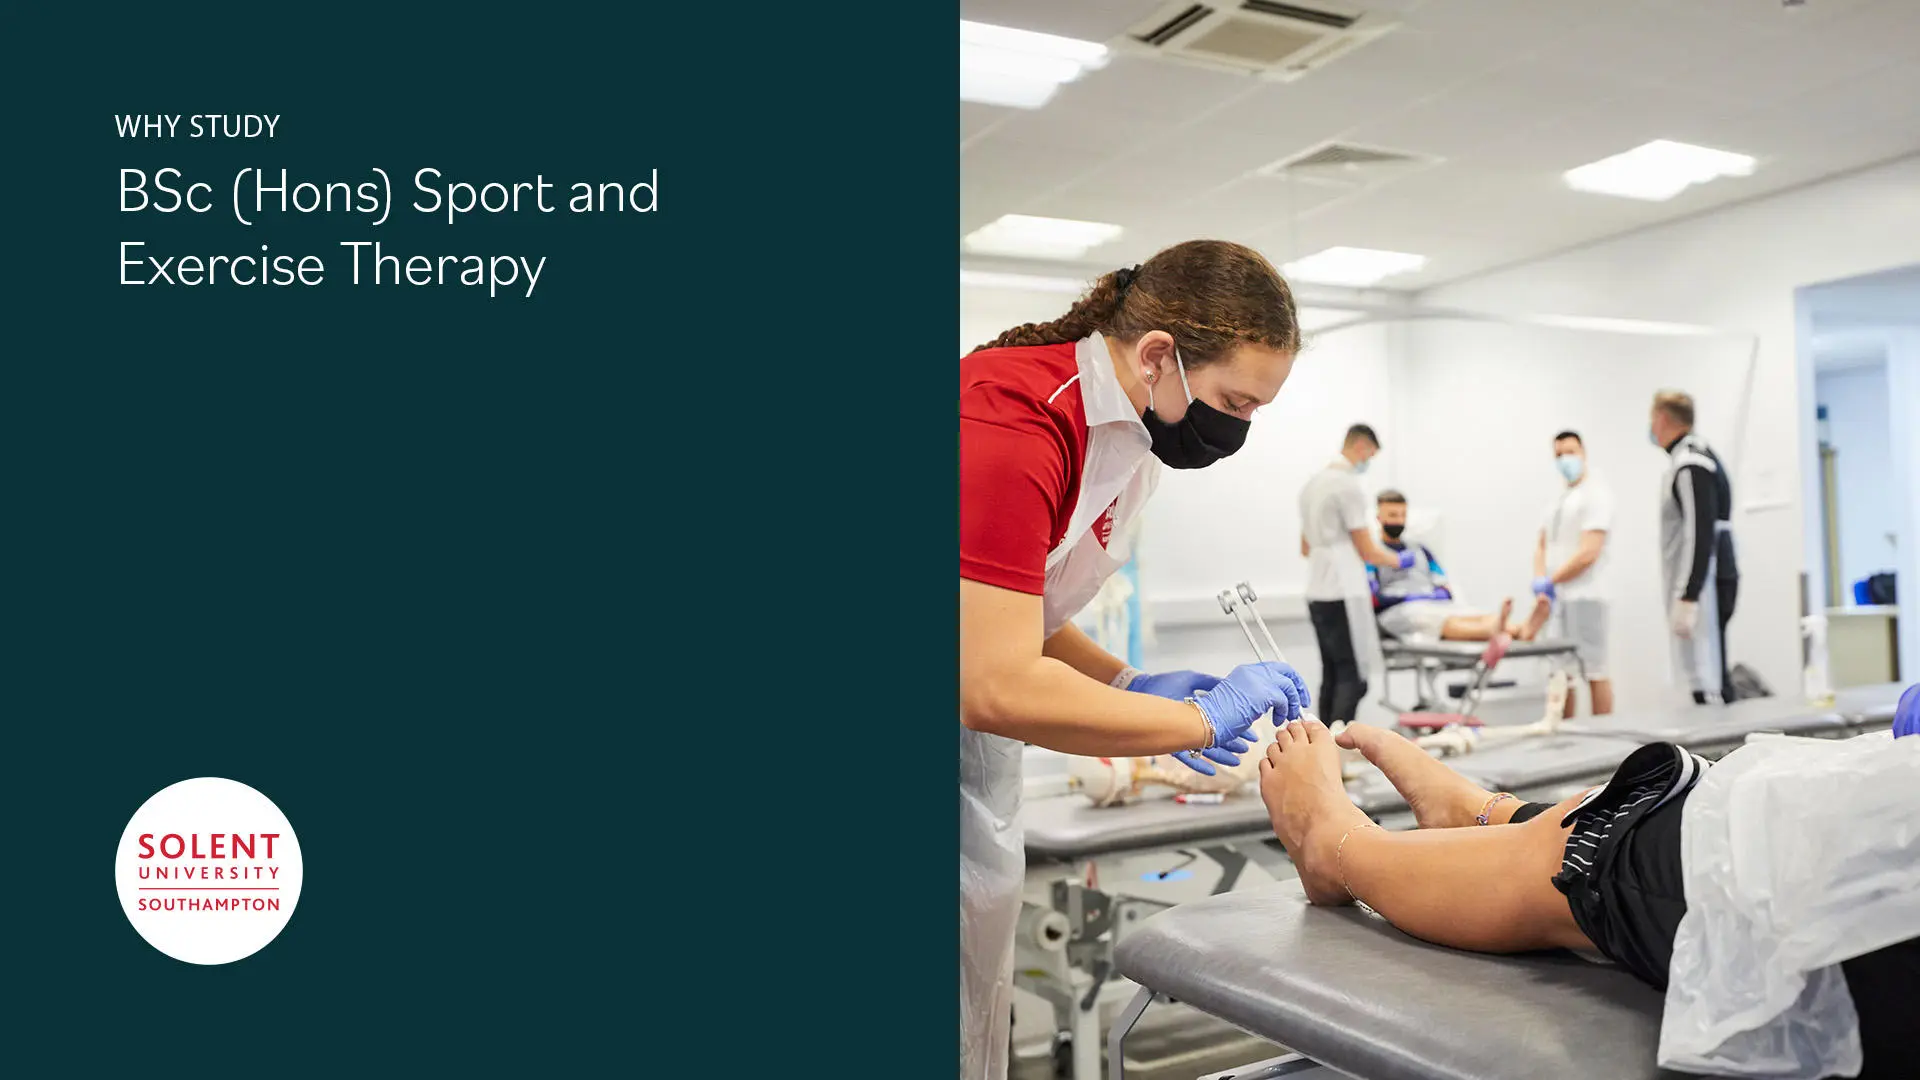 Image reads Why study BSc (Hons) Sport and Exercise Therapy